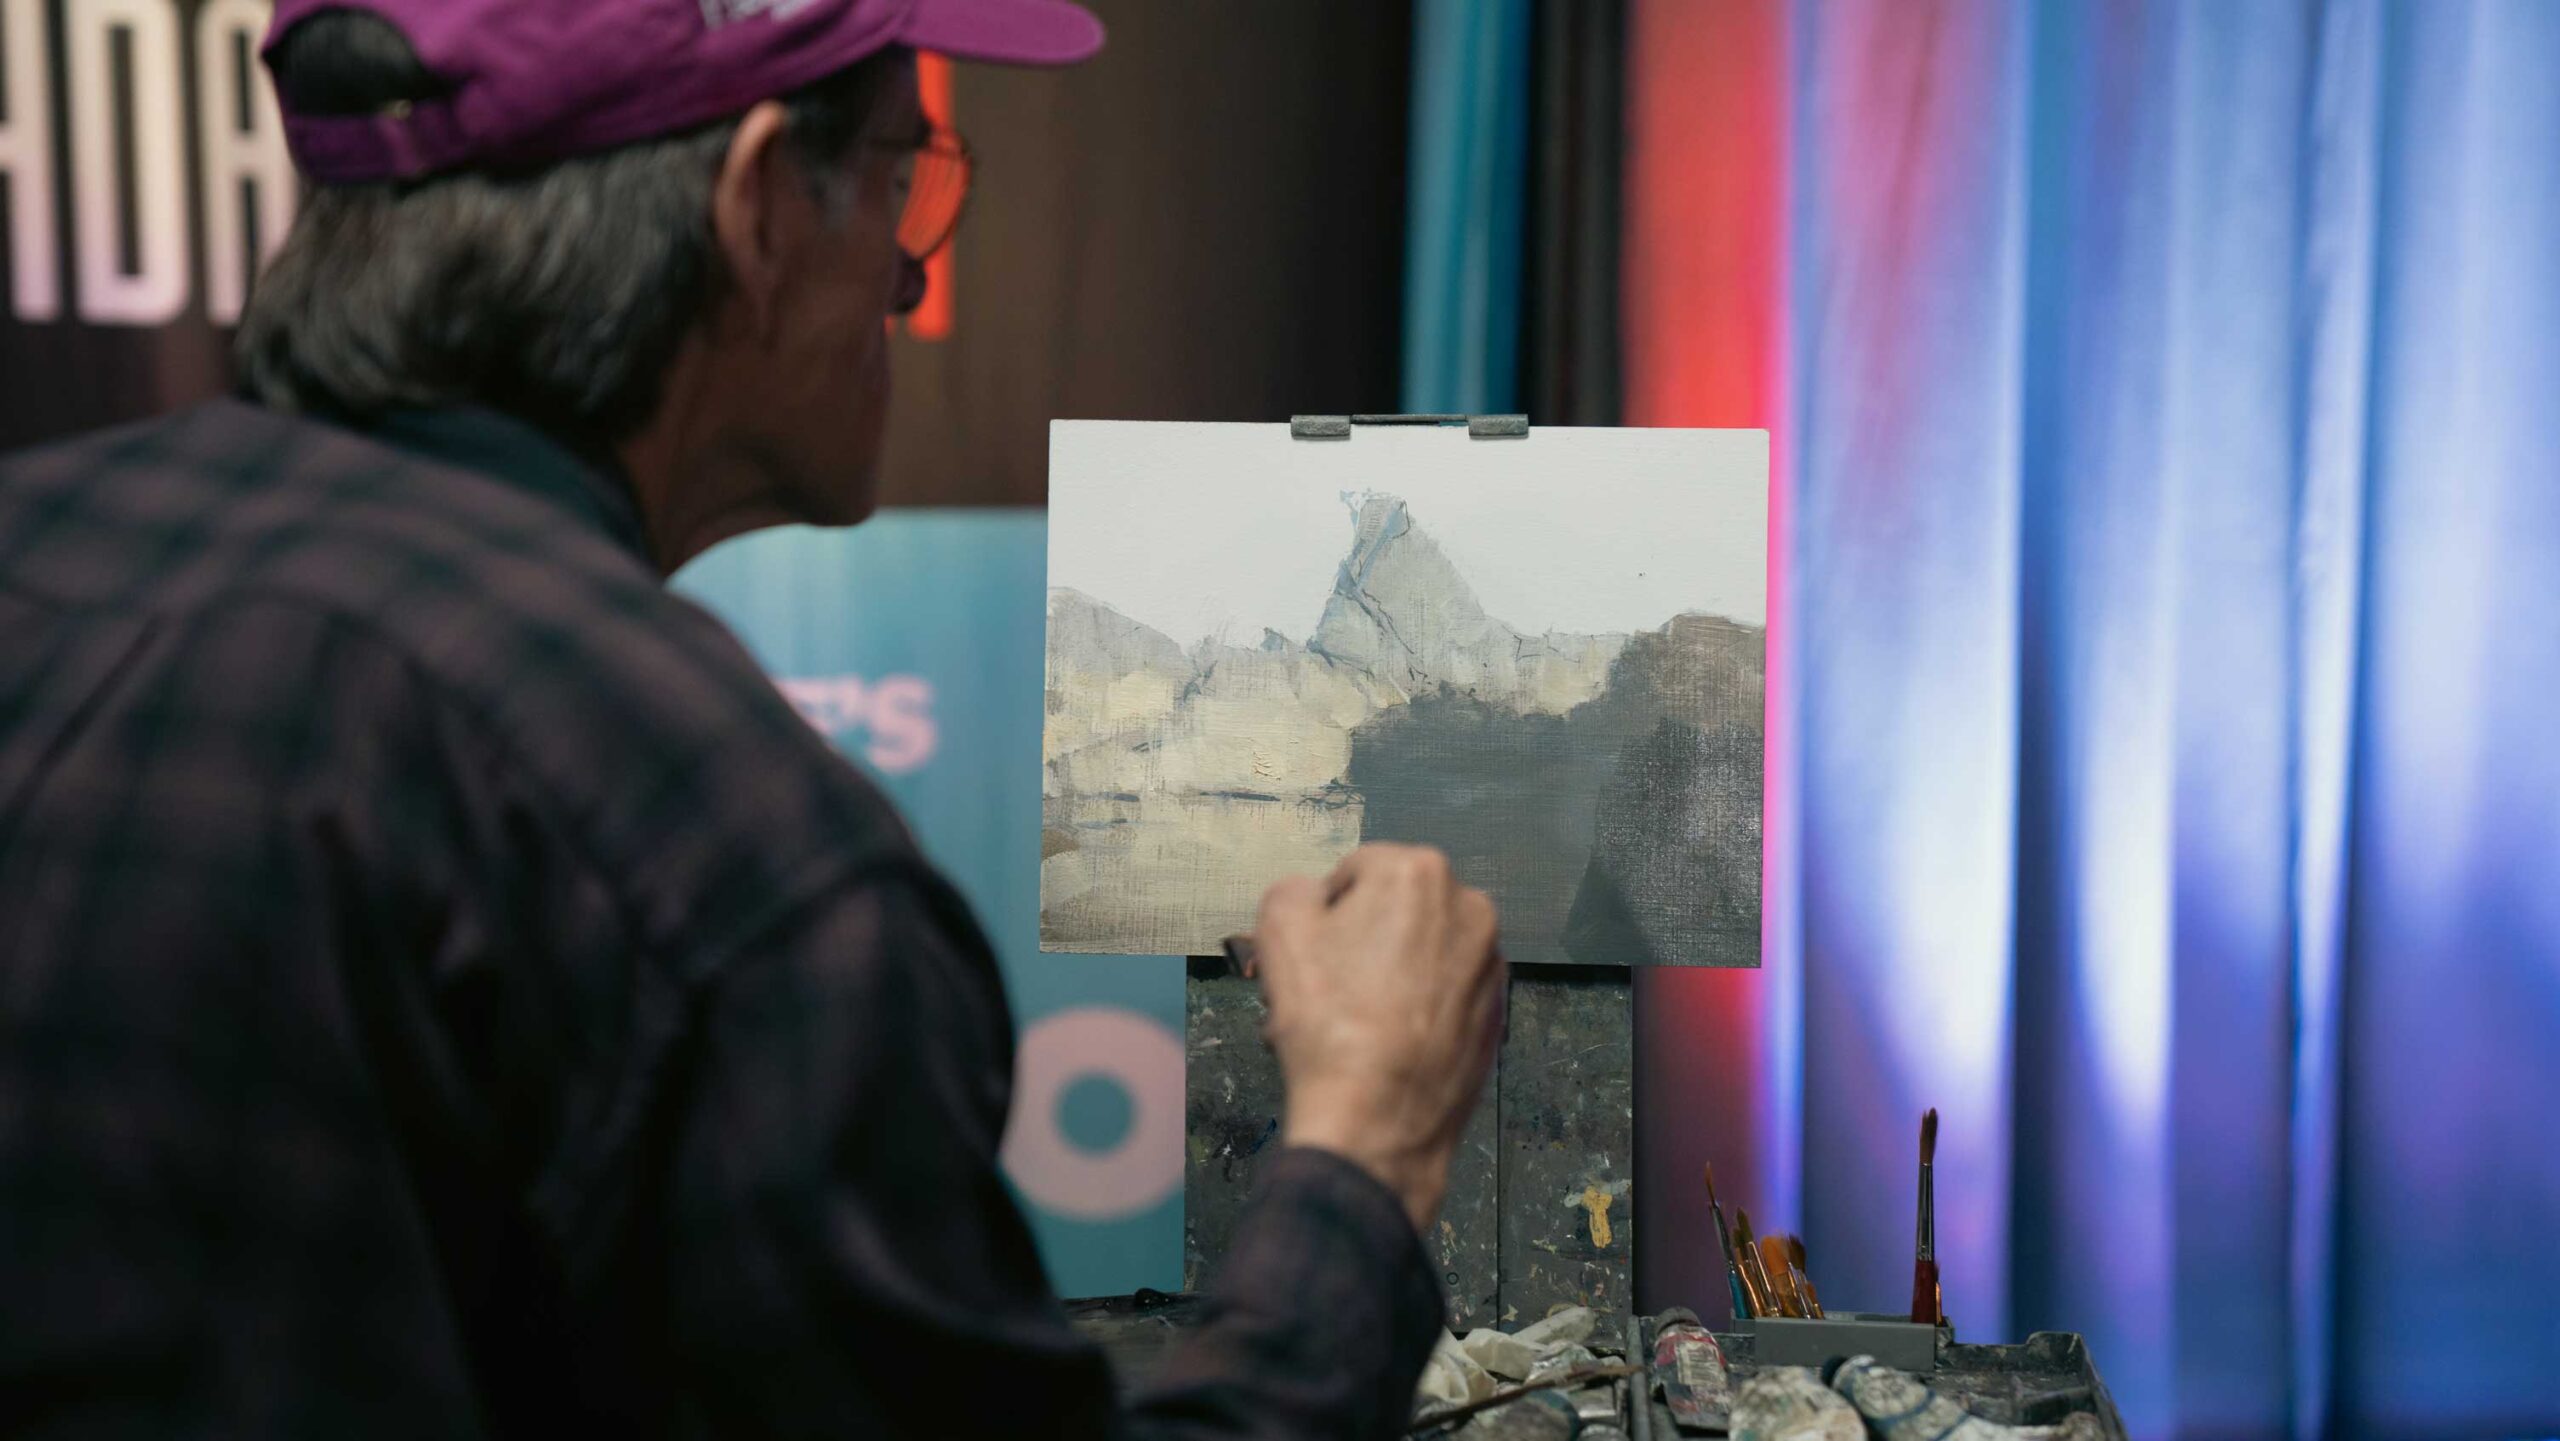 "The Old Masters gave me the idea to bring part of the landscape inside the room," Daniel said, "so I brought rocks because through rocks you can create ’synthetically' the plein air atmosphere,' as they used to call it."